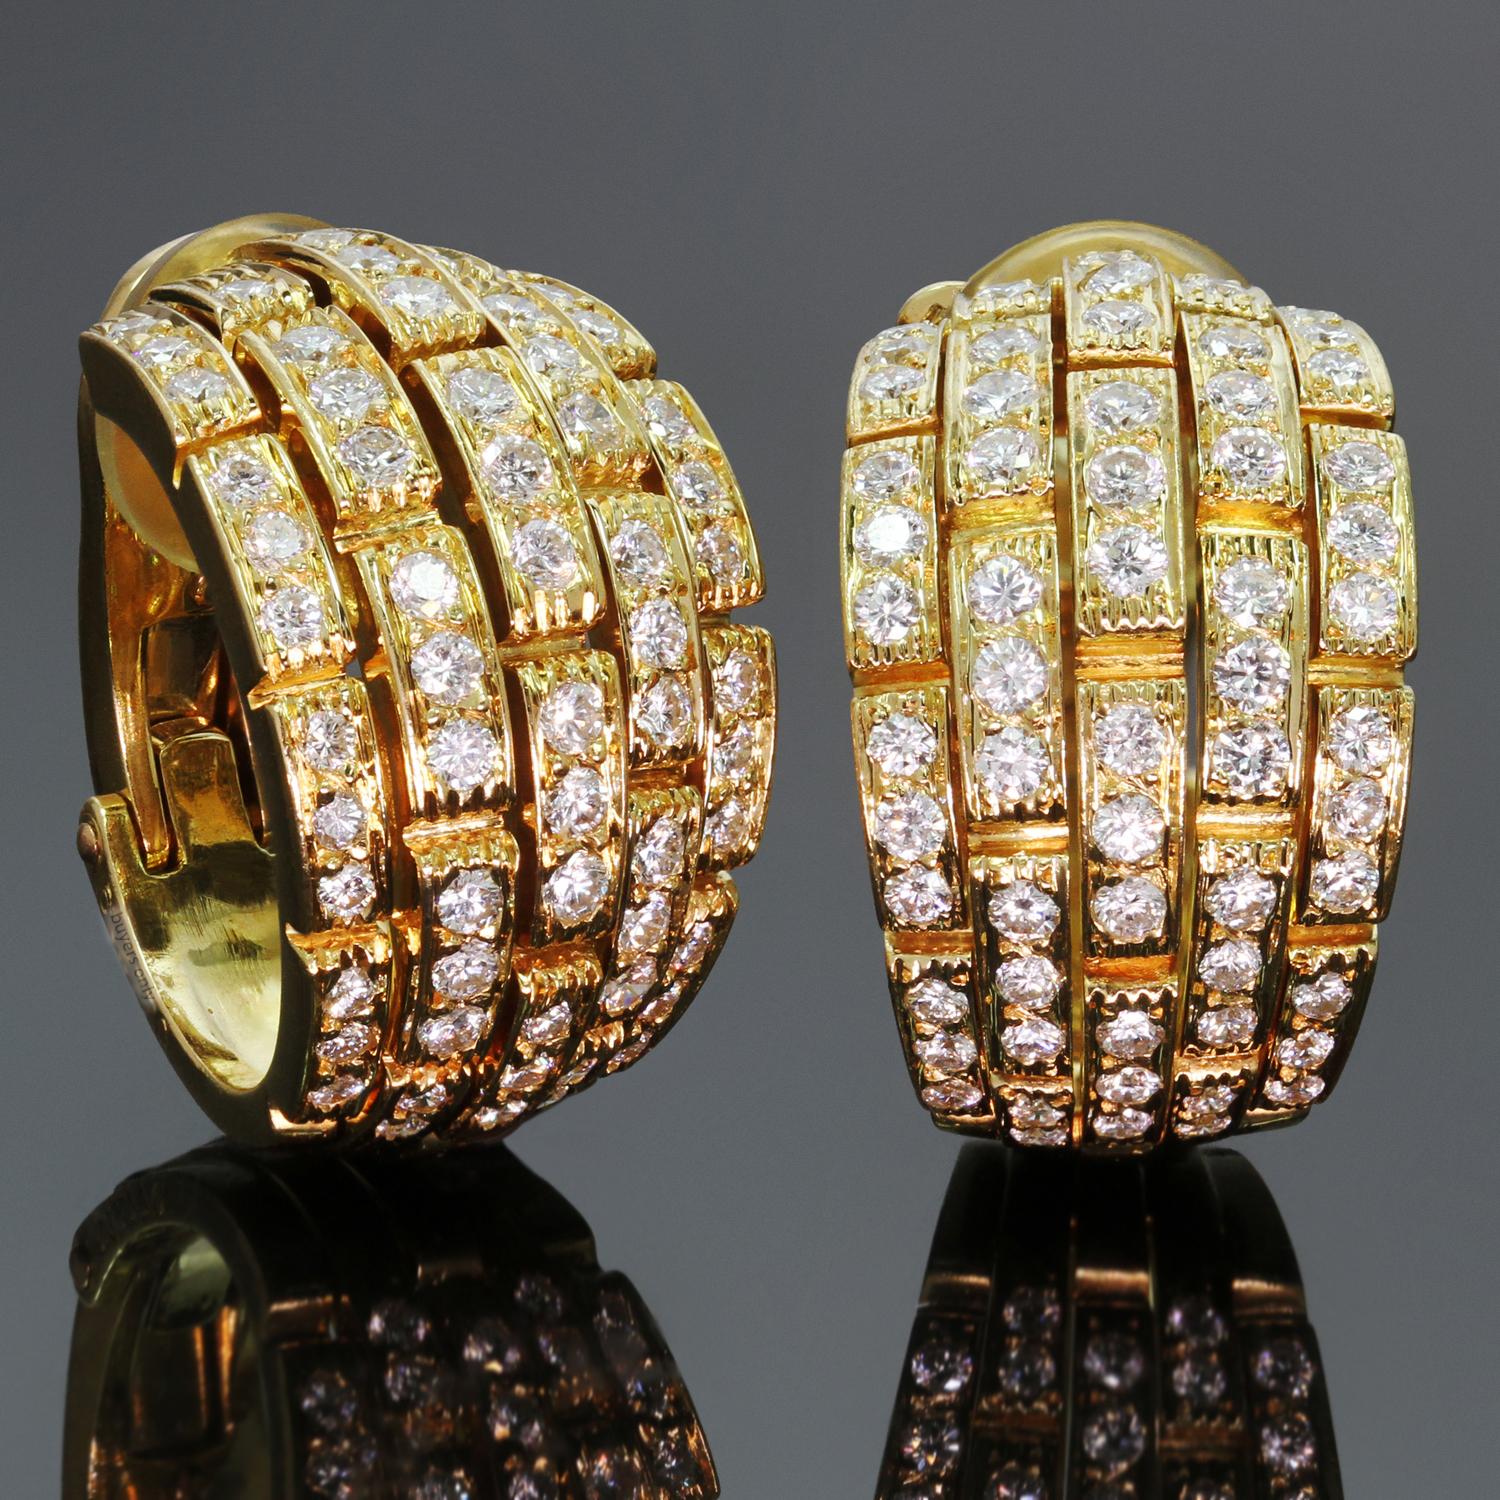 These classic Cartier wrap earrings from the iconic Panthère De Cartier collection feature 5 rows of rectangular links crafted in 18k yellow gold and set with brilliant-cut round diamonds of an estimated 2.00 carats. Made in France circa 2000s.